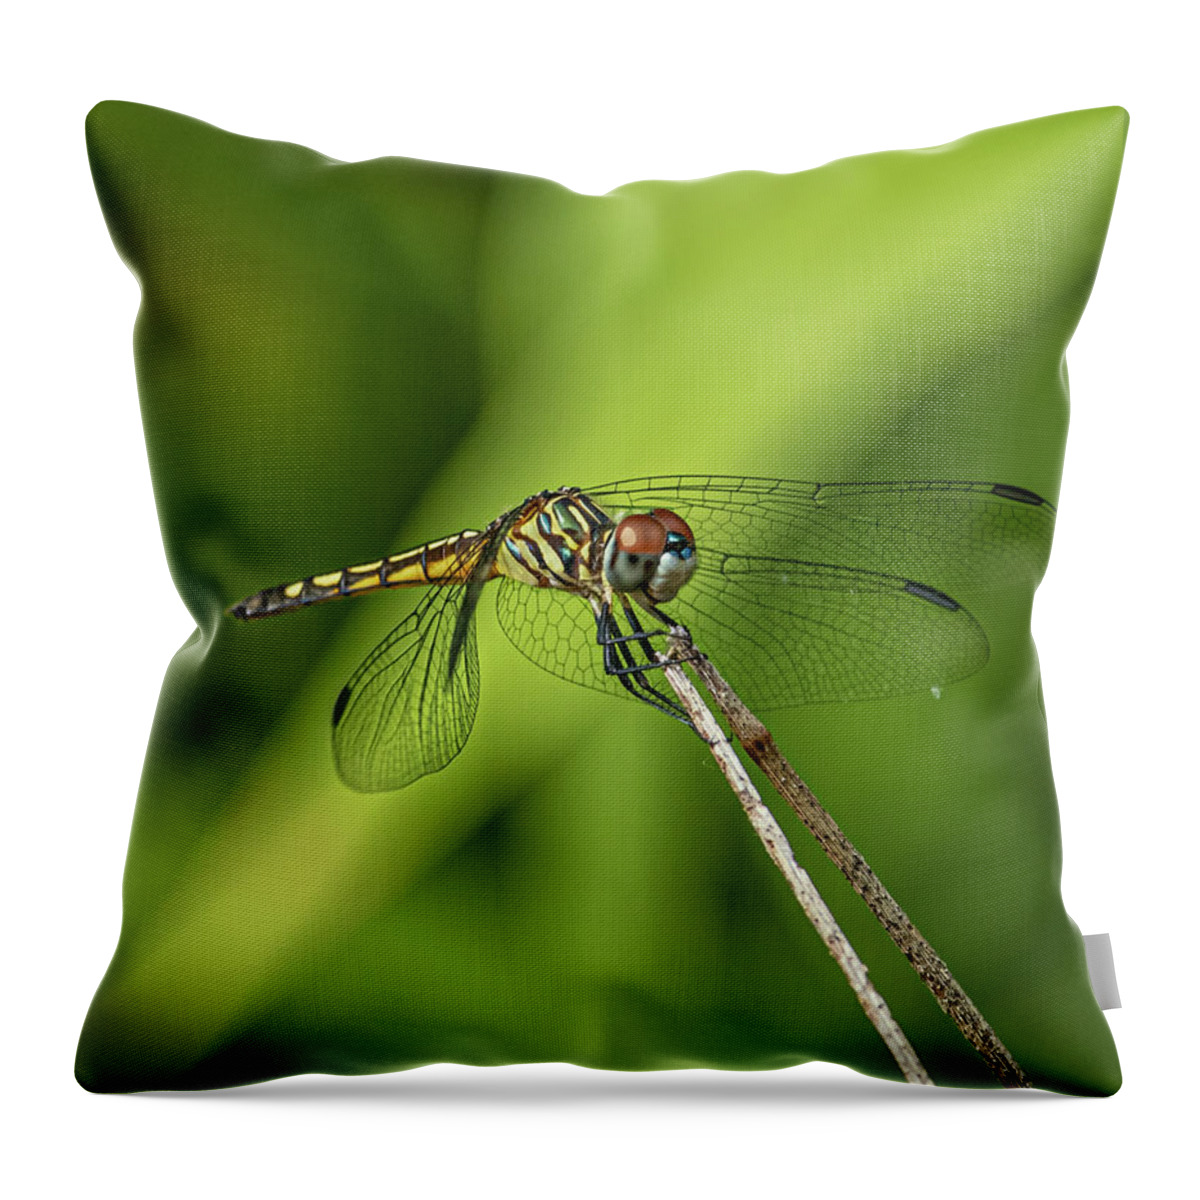 Wing Throw Pillow featuring the photograph Dragonfly by Rick Nelson